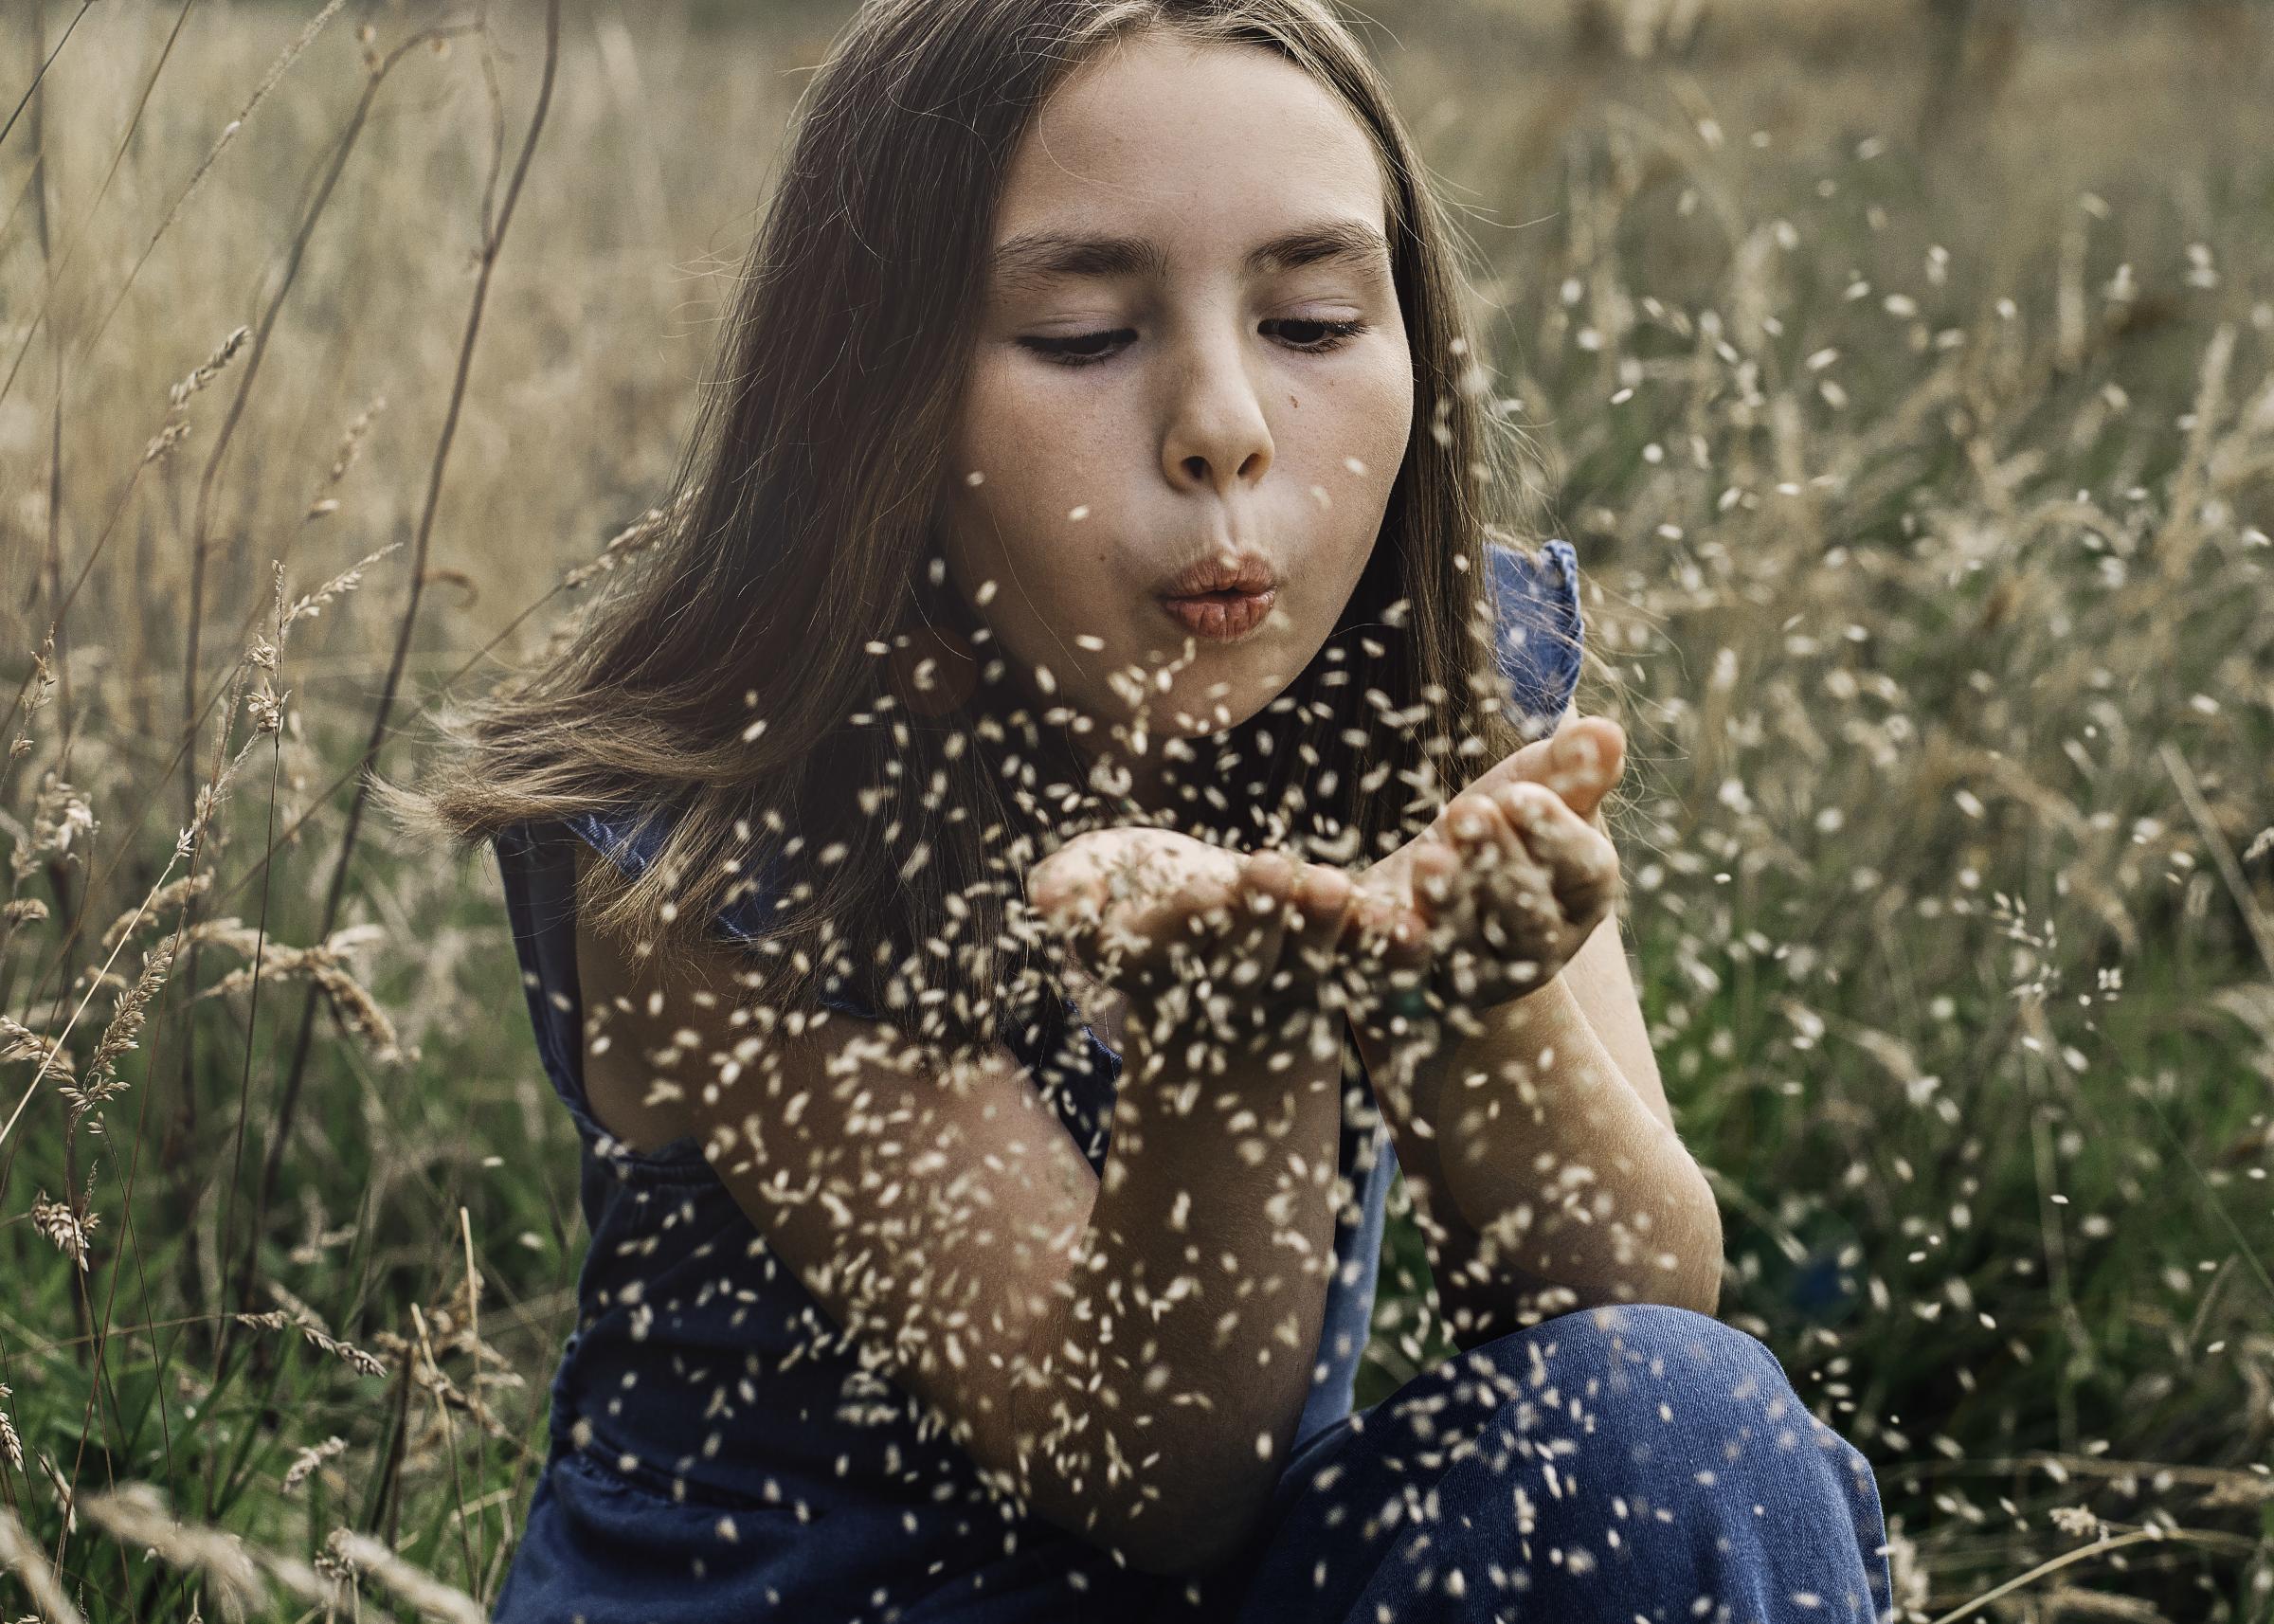 Girl blowing seeds (c) Evie and Tom Photography / 2020 Vision. 